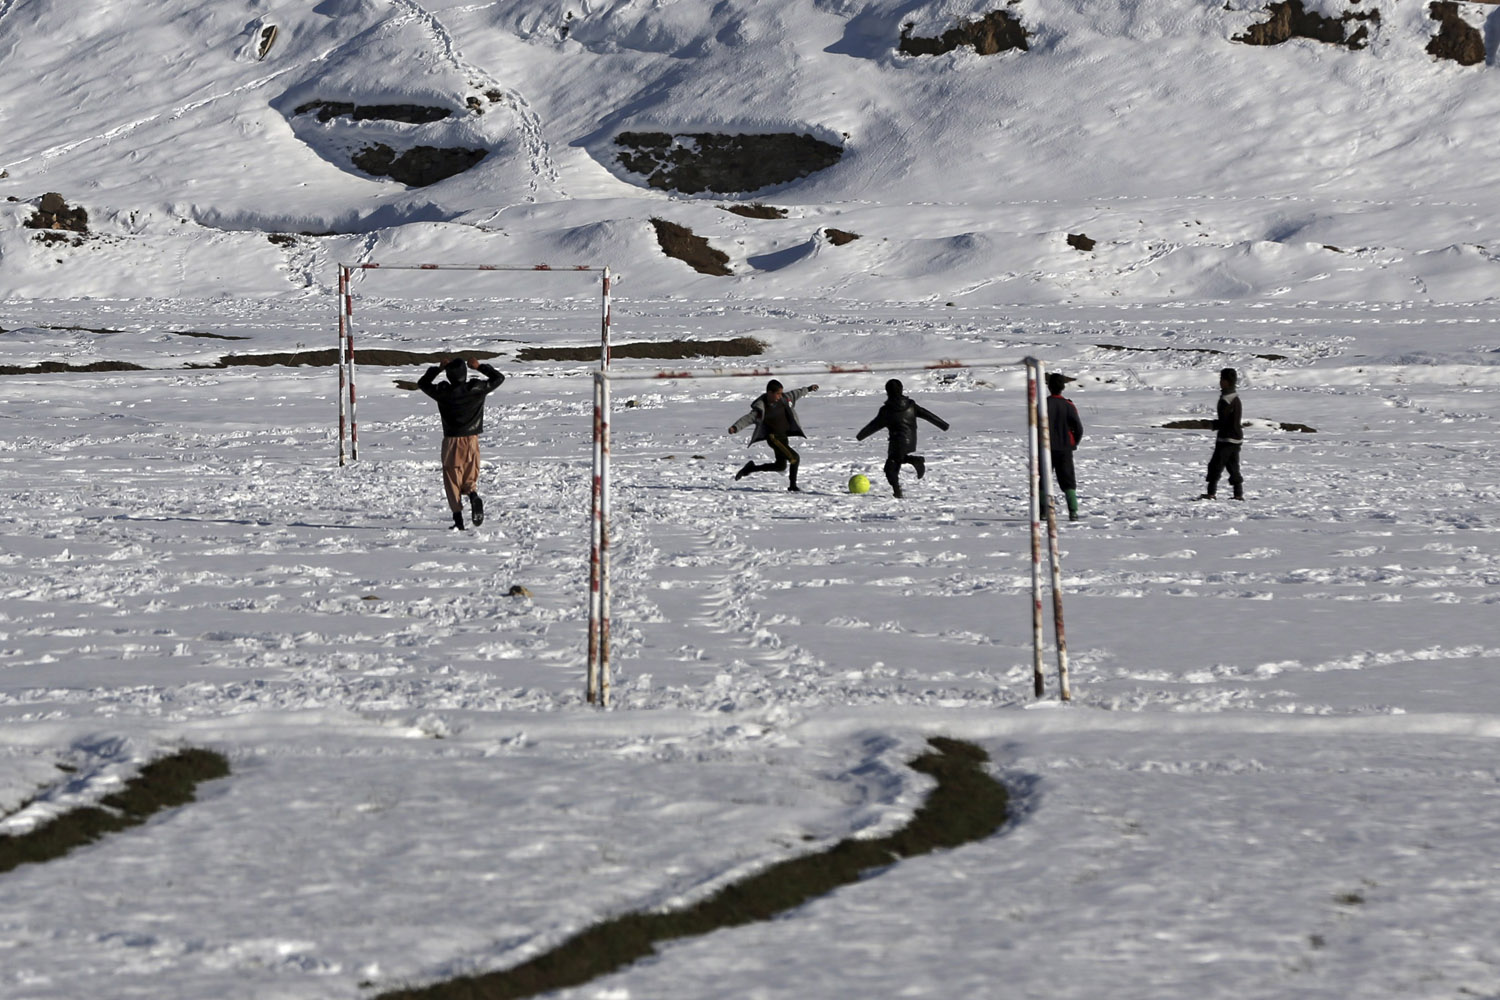 Feb. 11, 2014. Afghan boys play soccer in a desolate snow-covered village on the outskirts of Kabul.